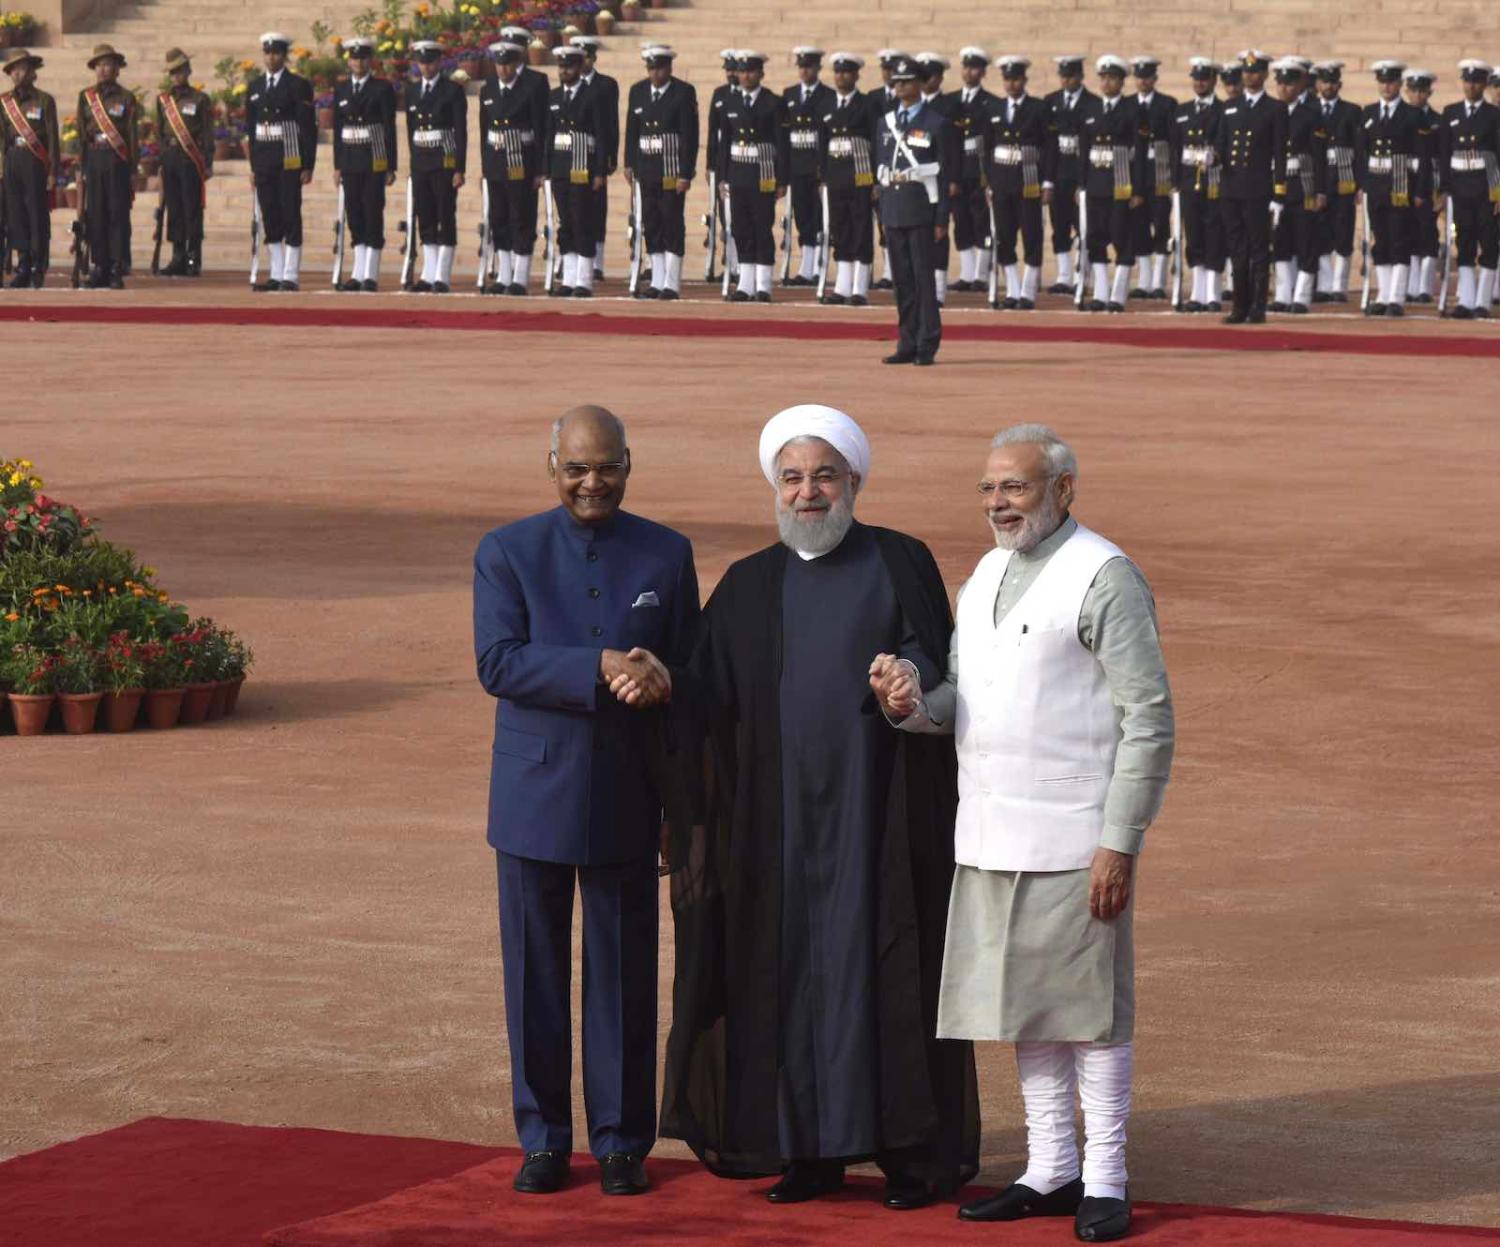 Iranian President Hassan Rouhani with Indian President Ramnath Kovind (L) and Prime Minister Narendra Modi (R) during a reception in New Delhi, February 2018 (Photo: Vipin Kumar/Hindustan Times via Getty Images)